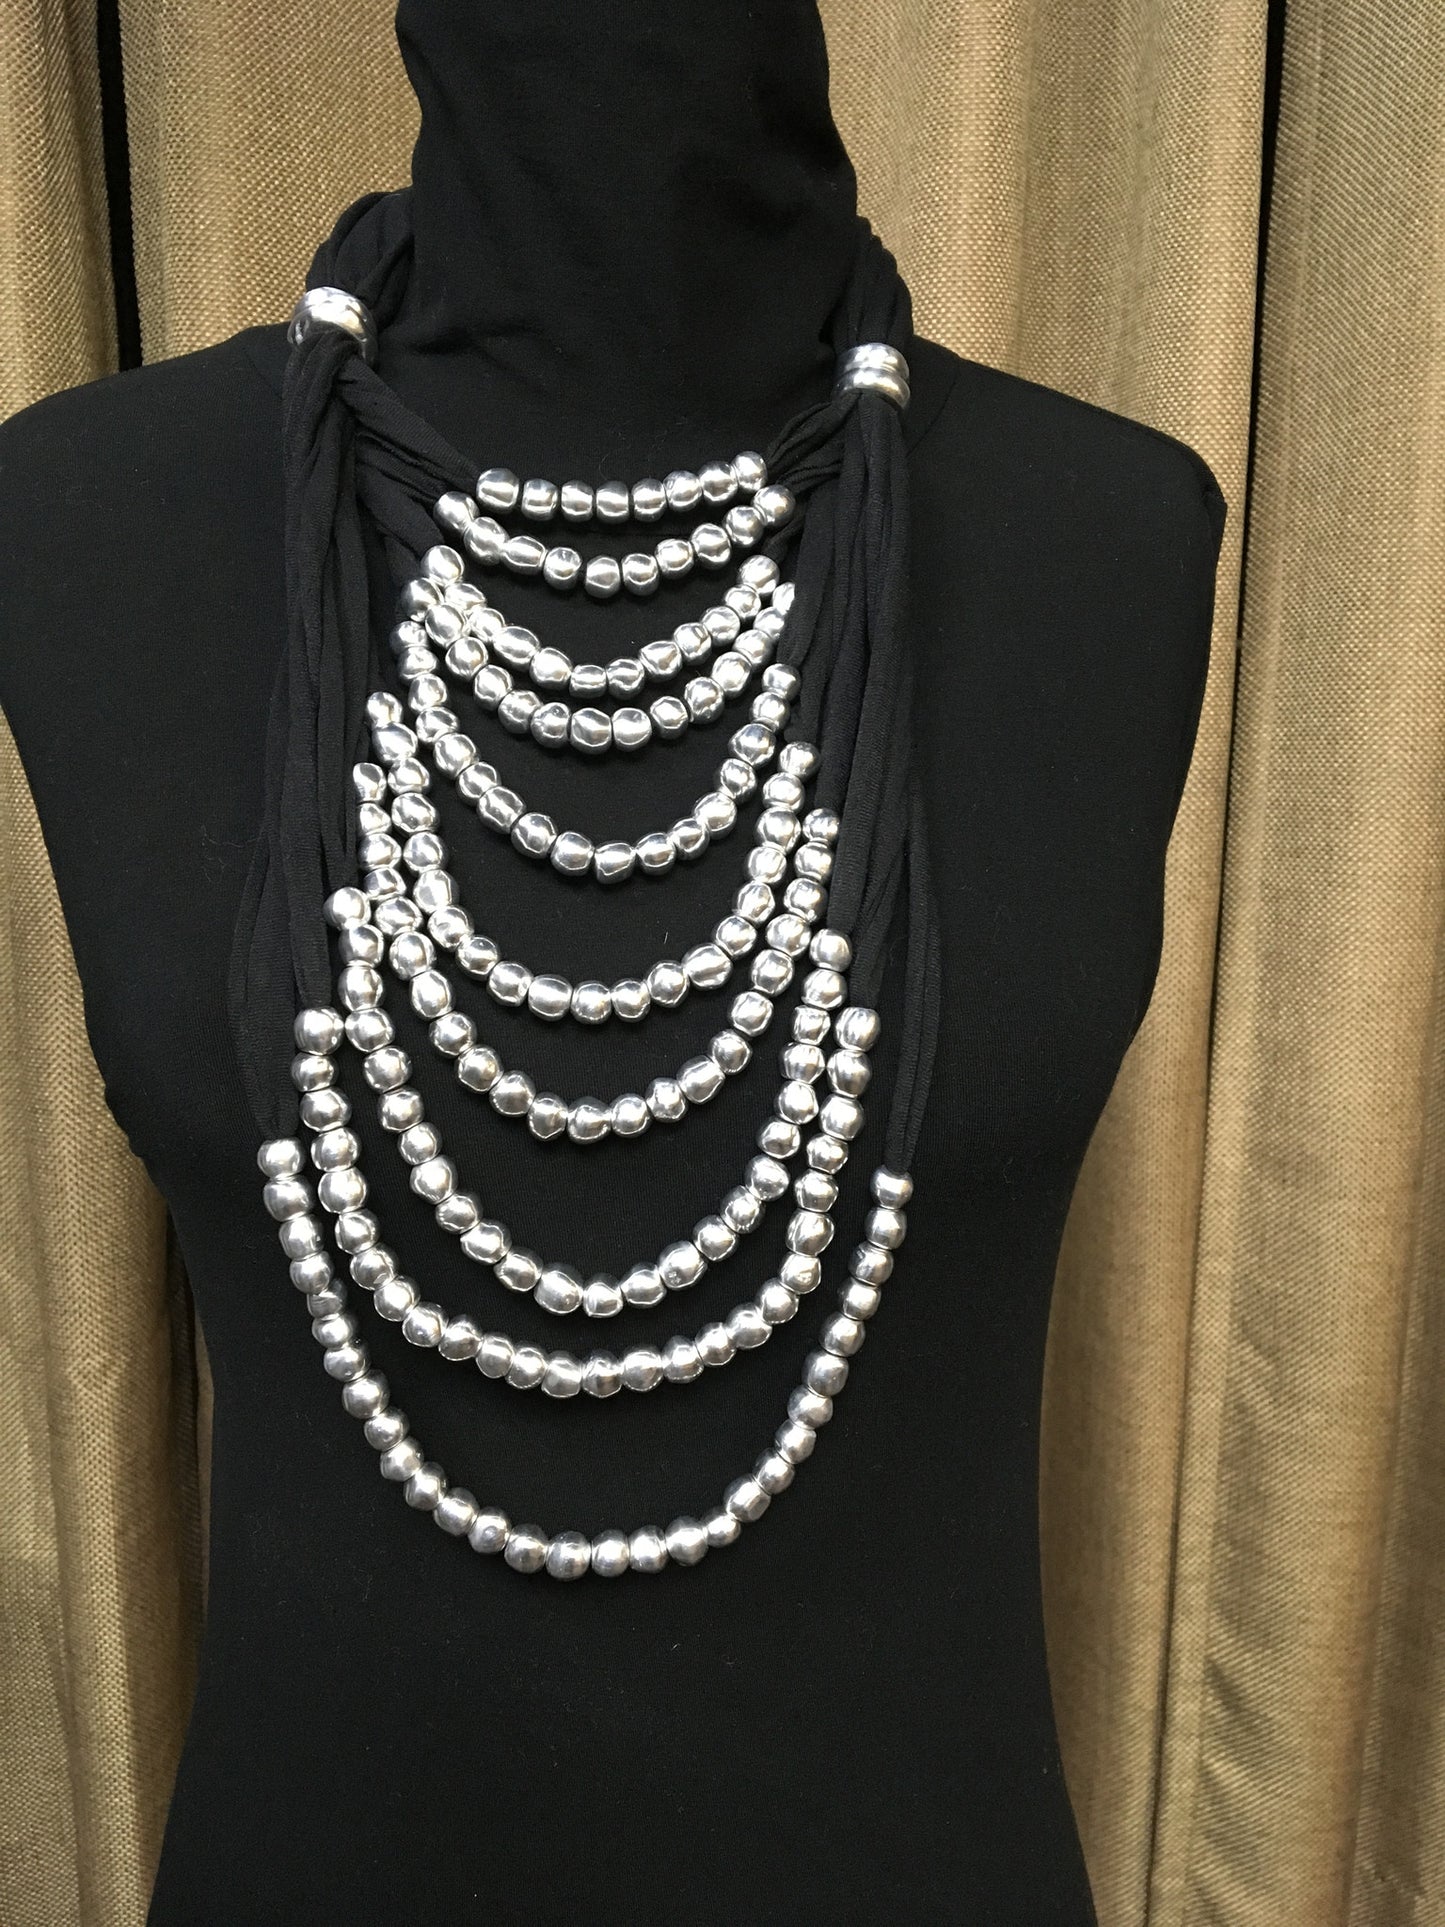 Adjustable long multi thread jersey and aluminum balls necklace.